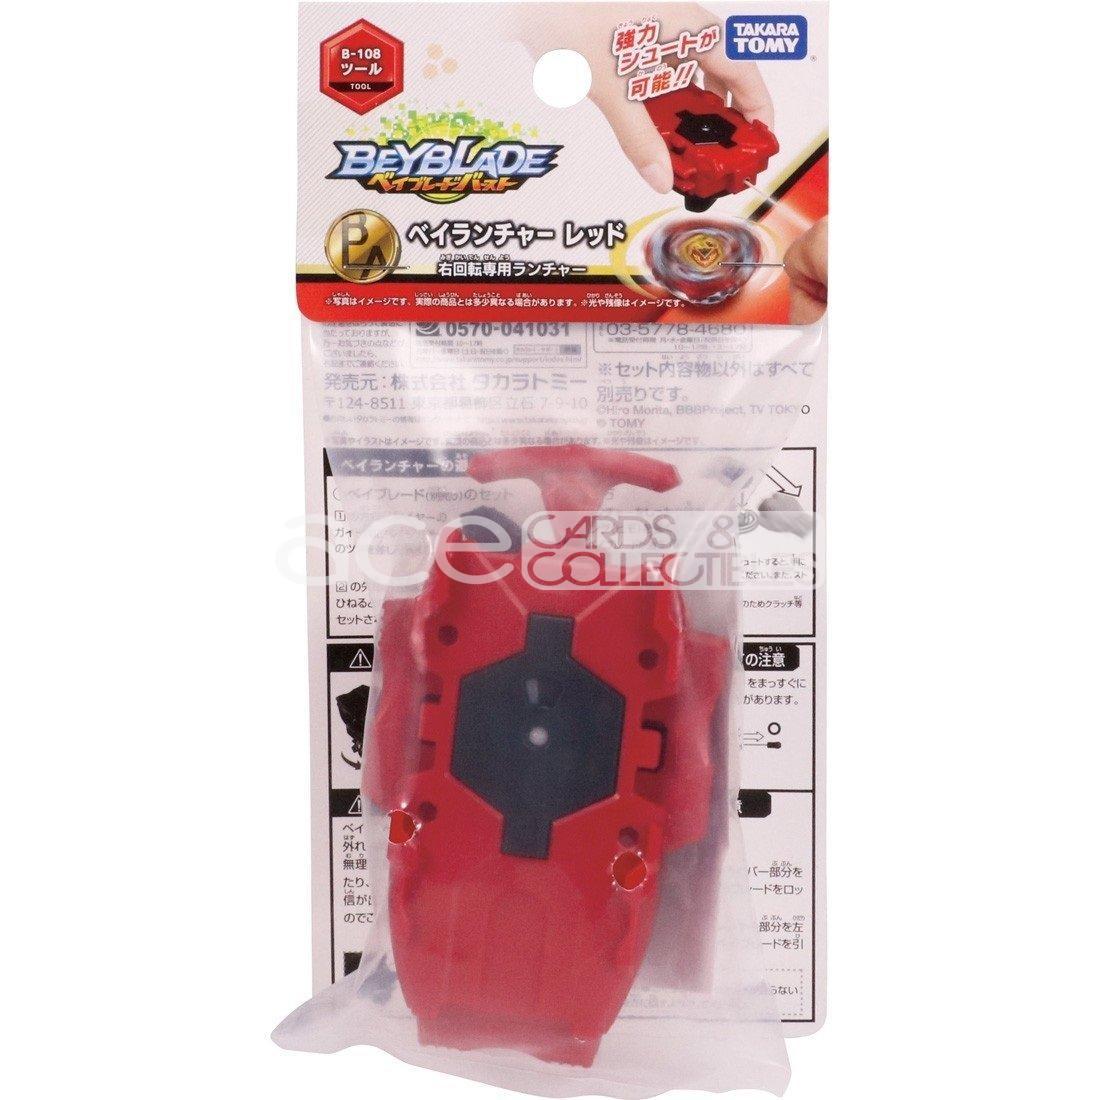 Beyblade Burst B-108 Bey Launcher Red-Takara Tomy-Ace Cards &amp; Collectibles